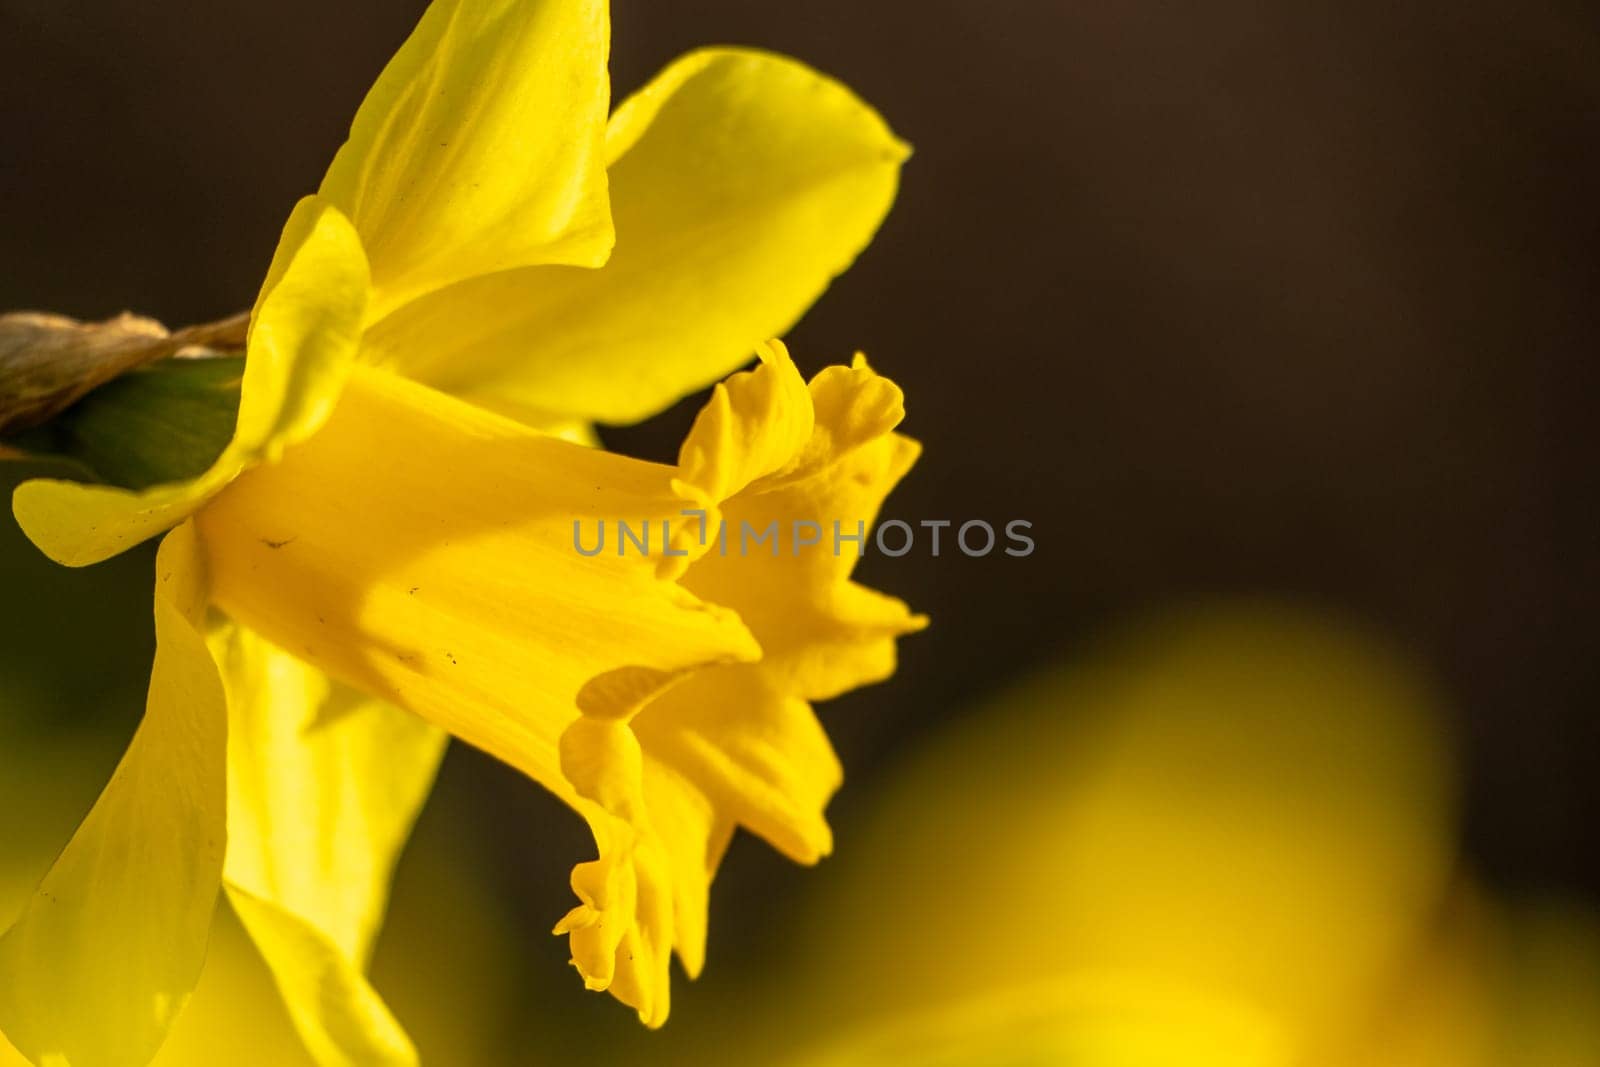 A bunch of yellow flowers with a blurry background. The flowers are in full bloom and are the main focus of the image